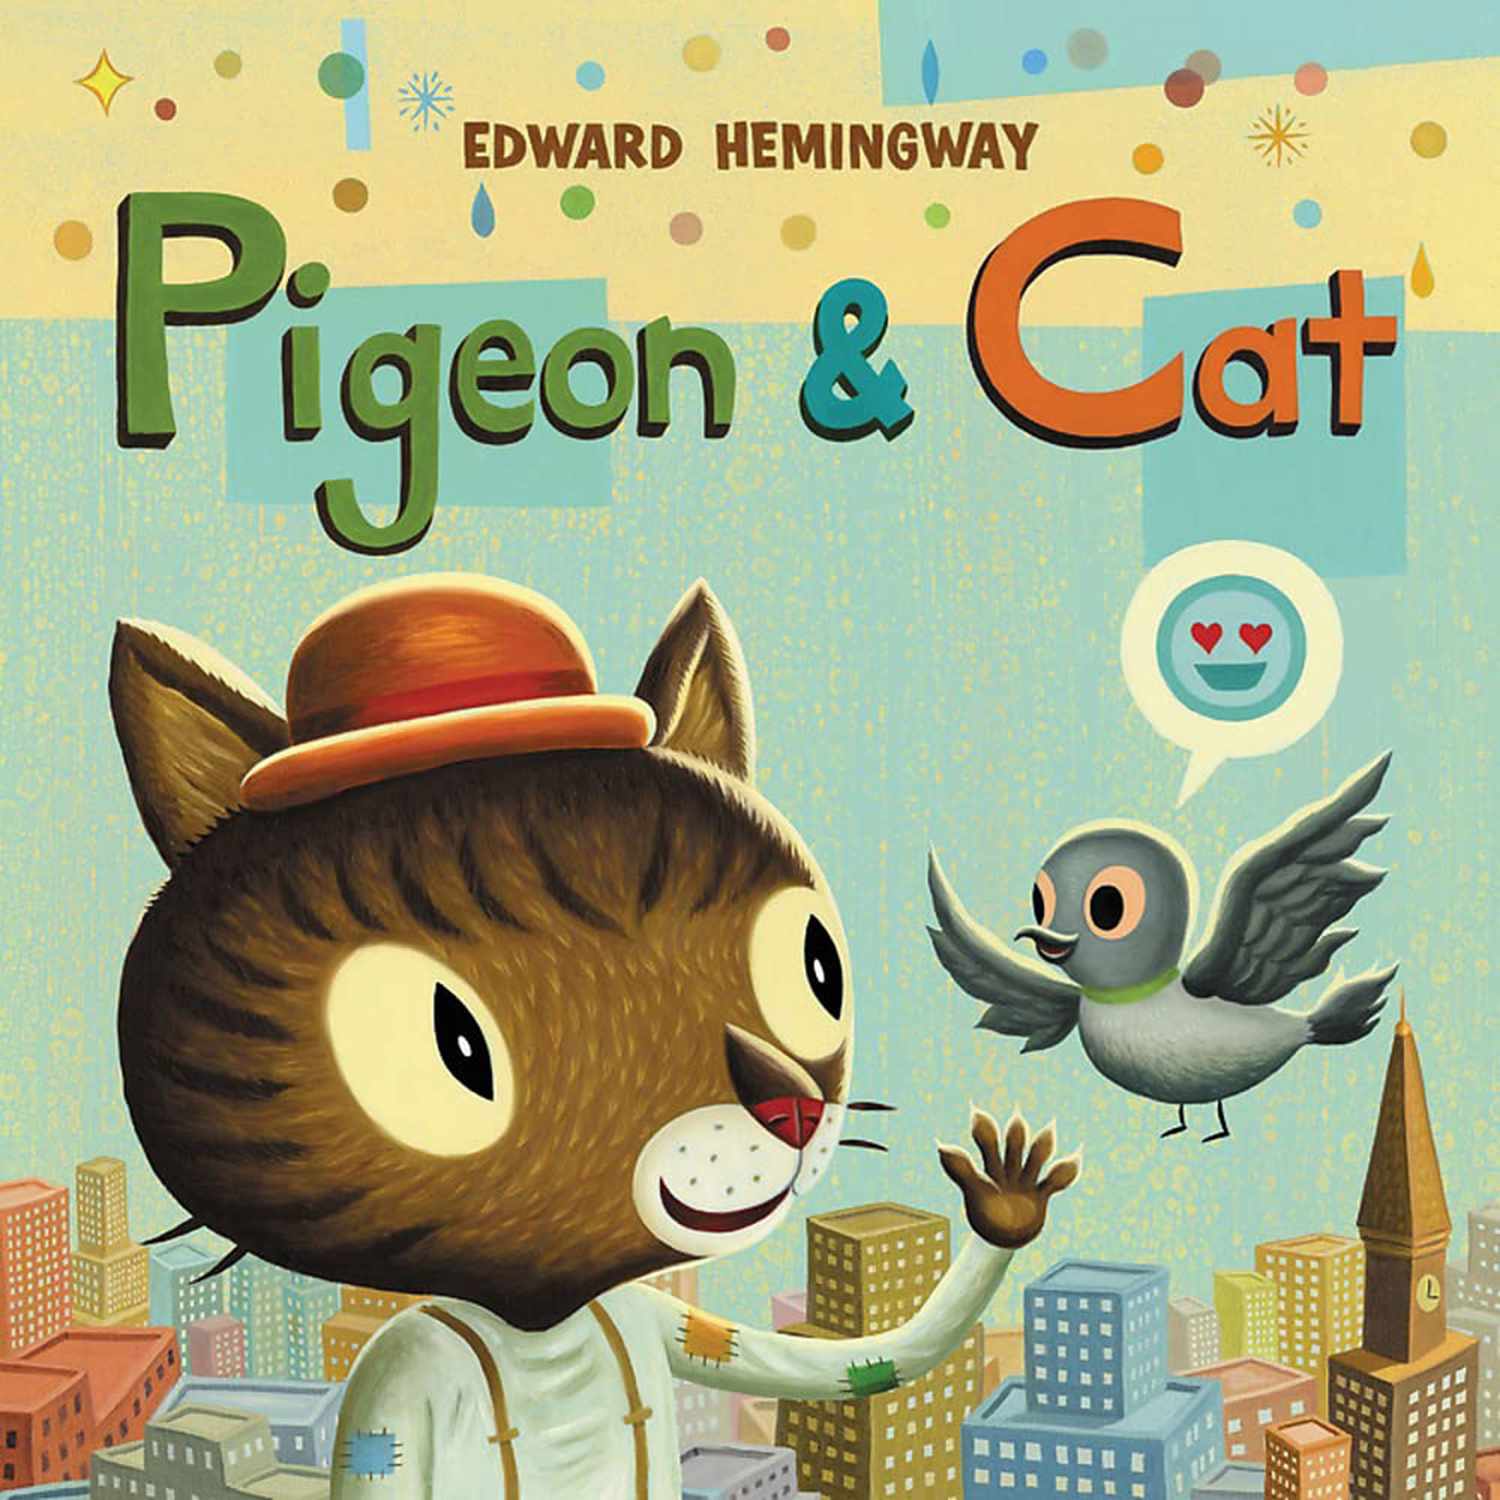 Pigeon and Cat by Edward Hemingway